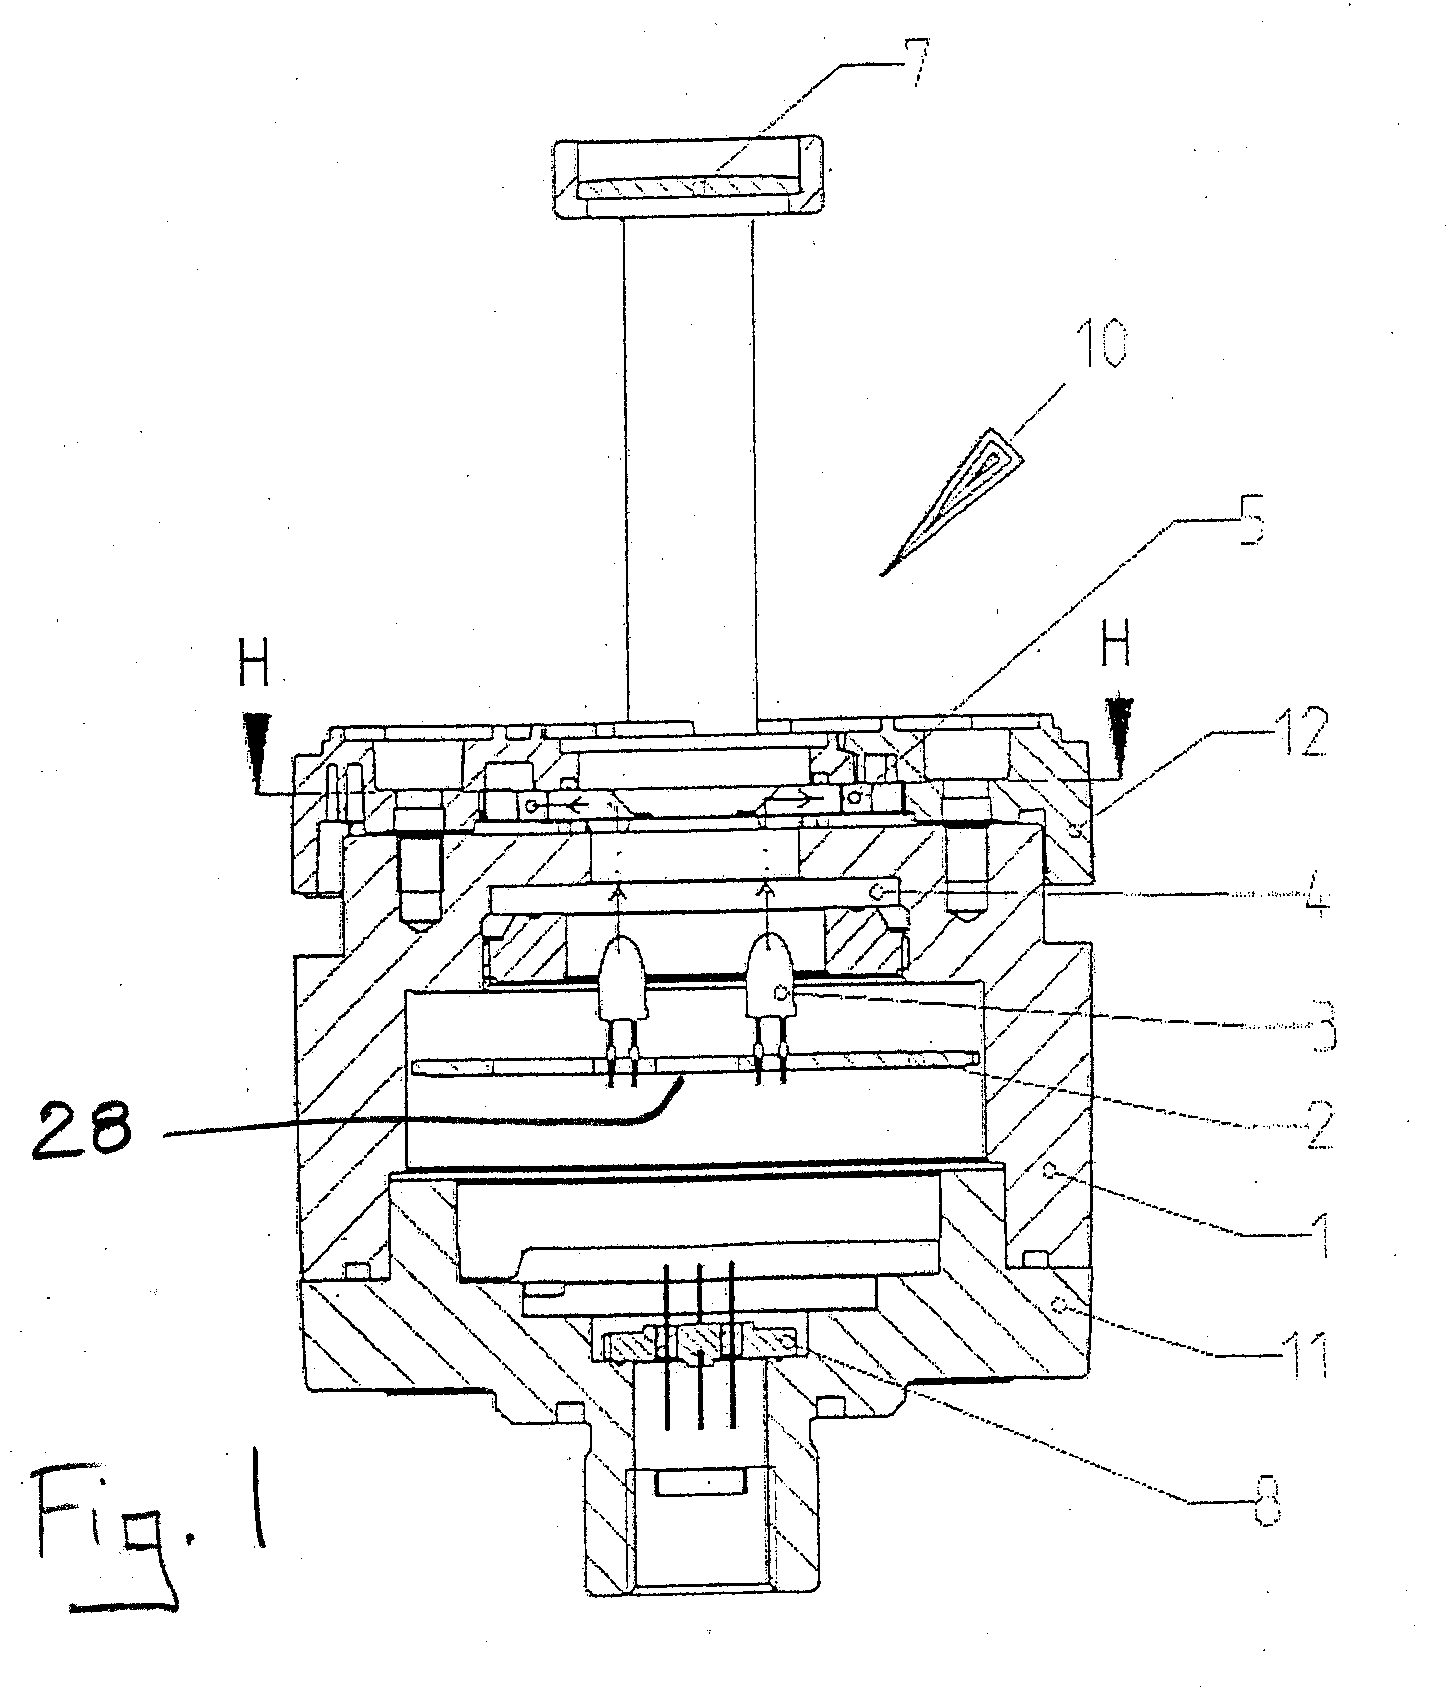 Gas sensor with an especially explosion-proof housing